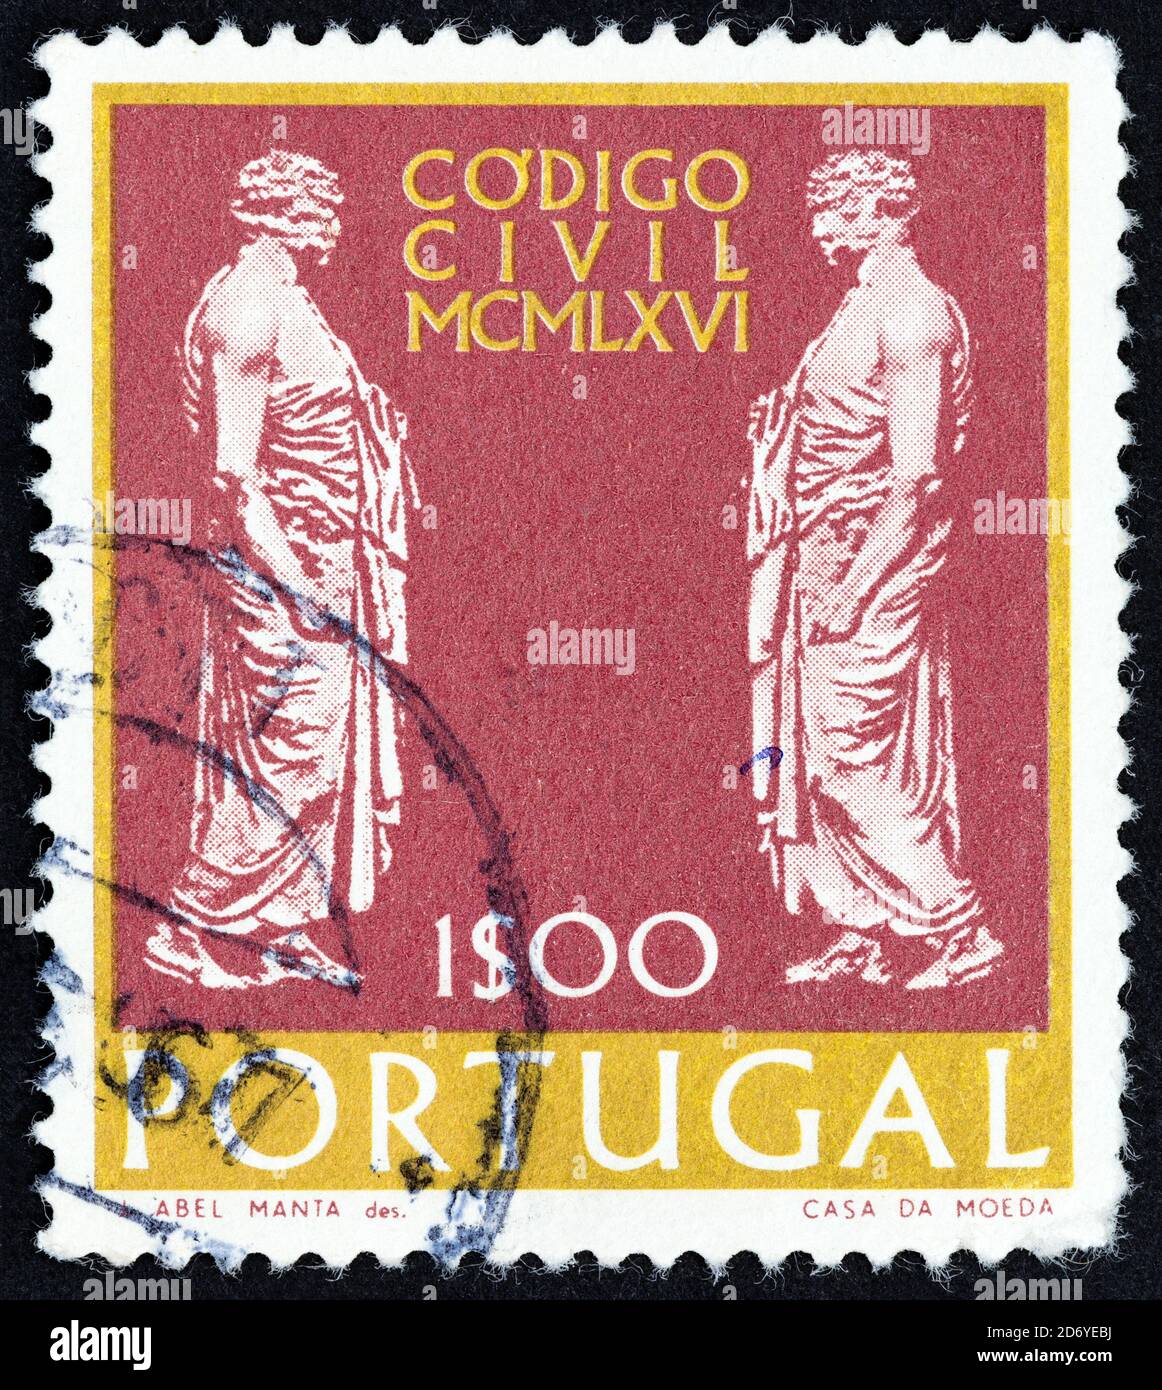 PORTUGAL - CIRCA 1967: A stamp printed in Portugal from the 'New Law for the Administration of Justice' issue shows Roman Senators, circa 1967. Stock Photo